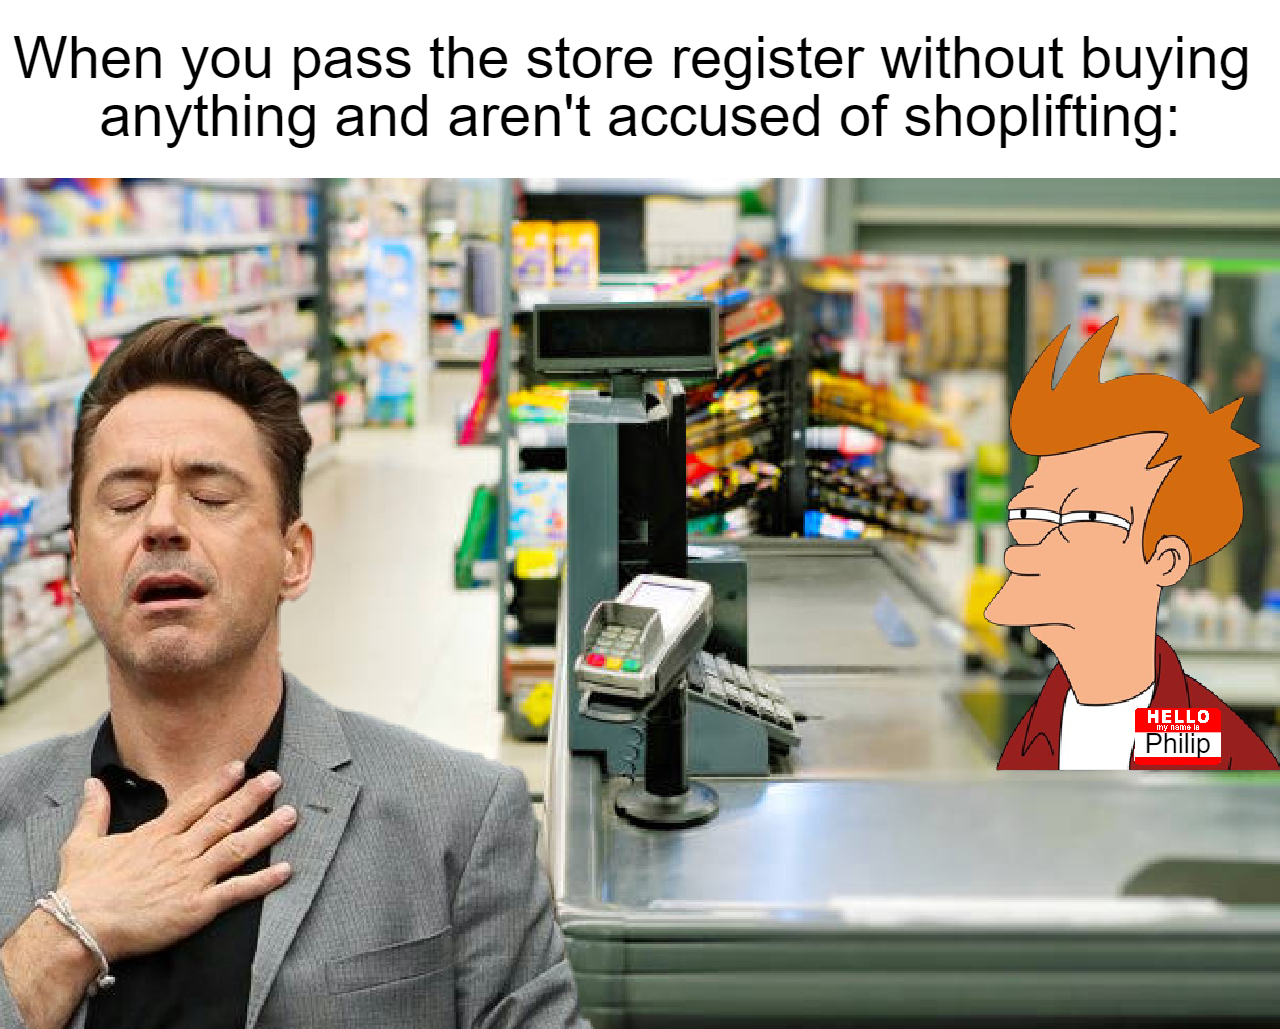 dank memes - convenience store background - When you pass the store register without buying anything and aren't accused of shoplifting Hello Philip